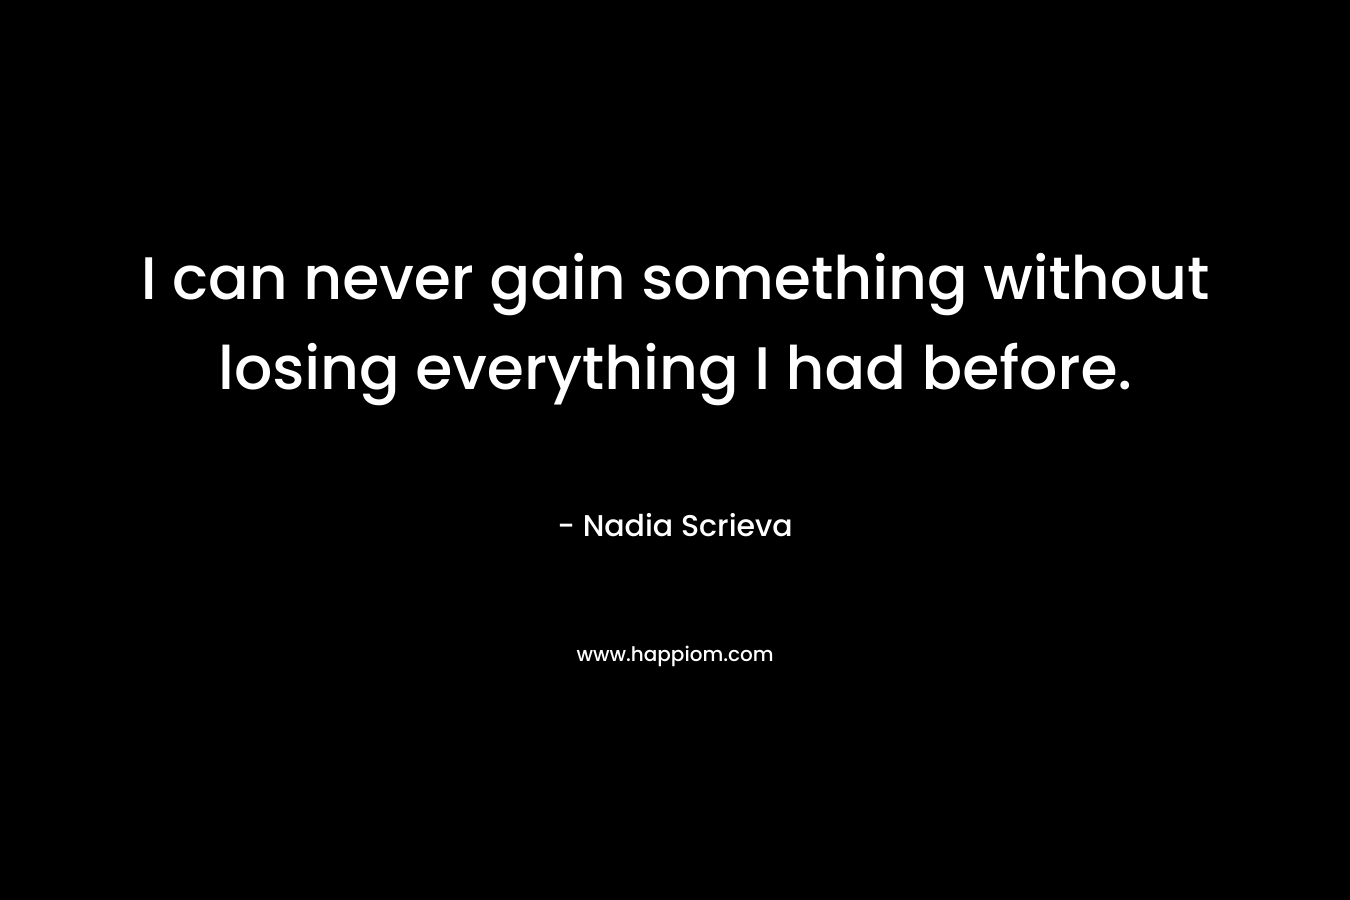 I can never gain something without losing everything I had before.